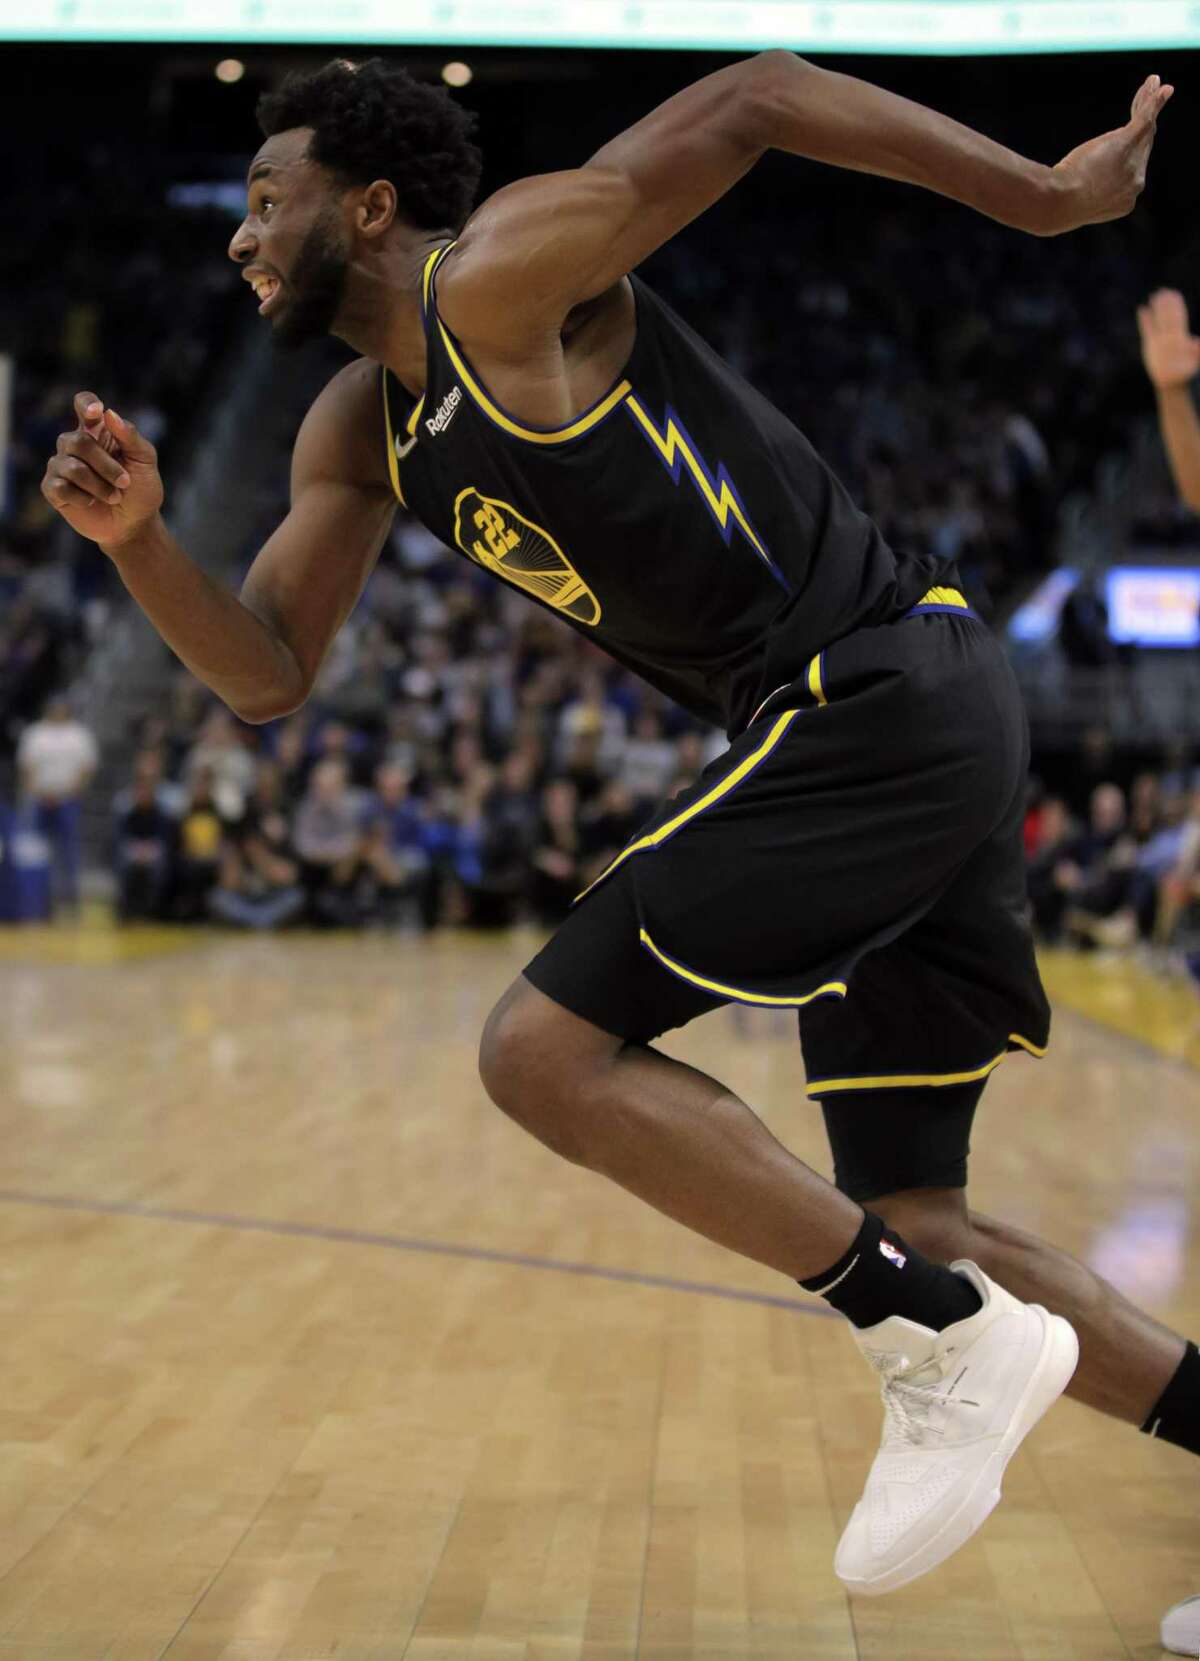 Andrew Wiggins (22) runs in to chase down a rebound as the Golden State Warriors played the Phoenix Suns at Chase Center in San Francisco, Calif., on Wednesday, March 30, 2022.